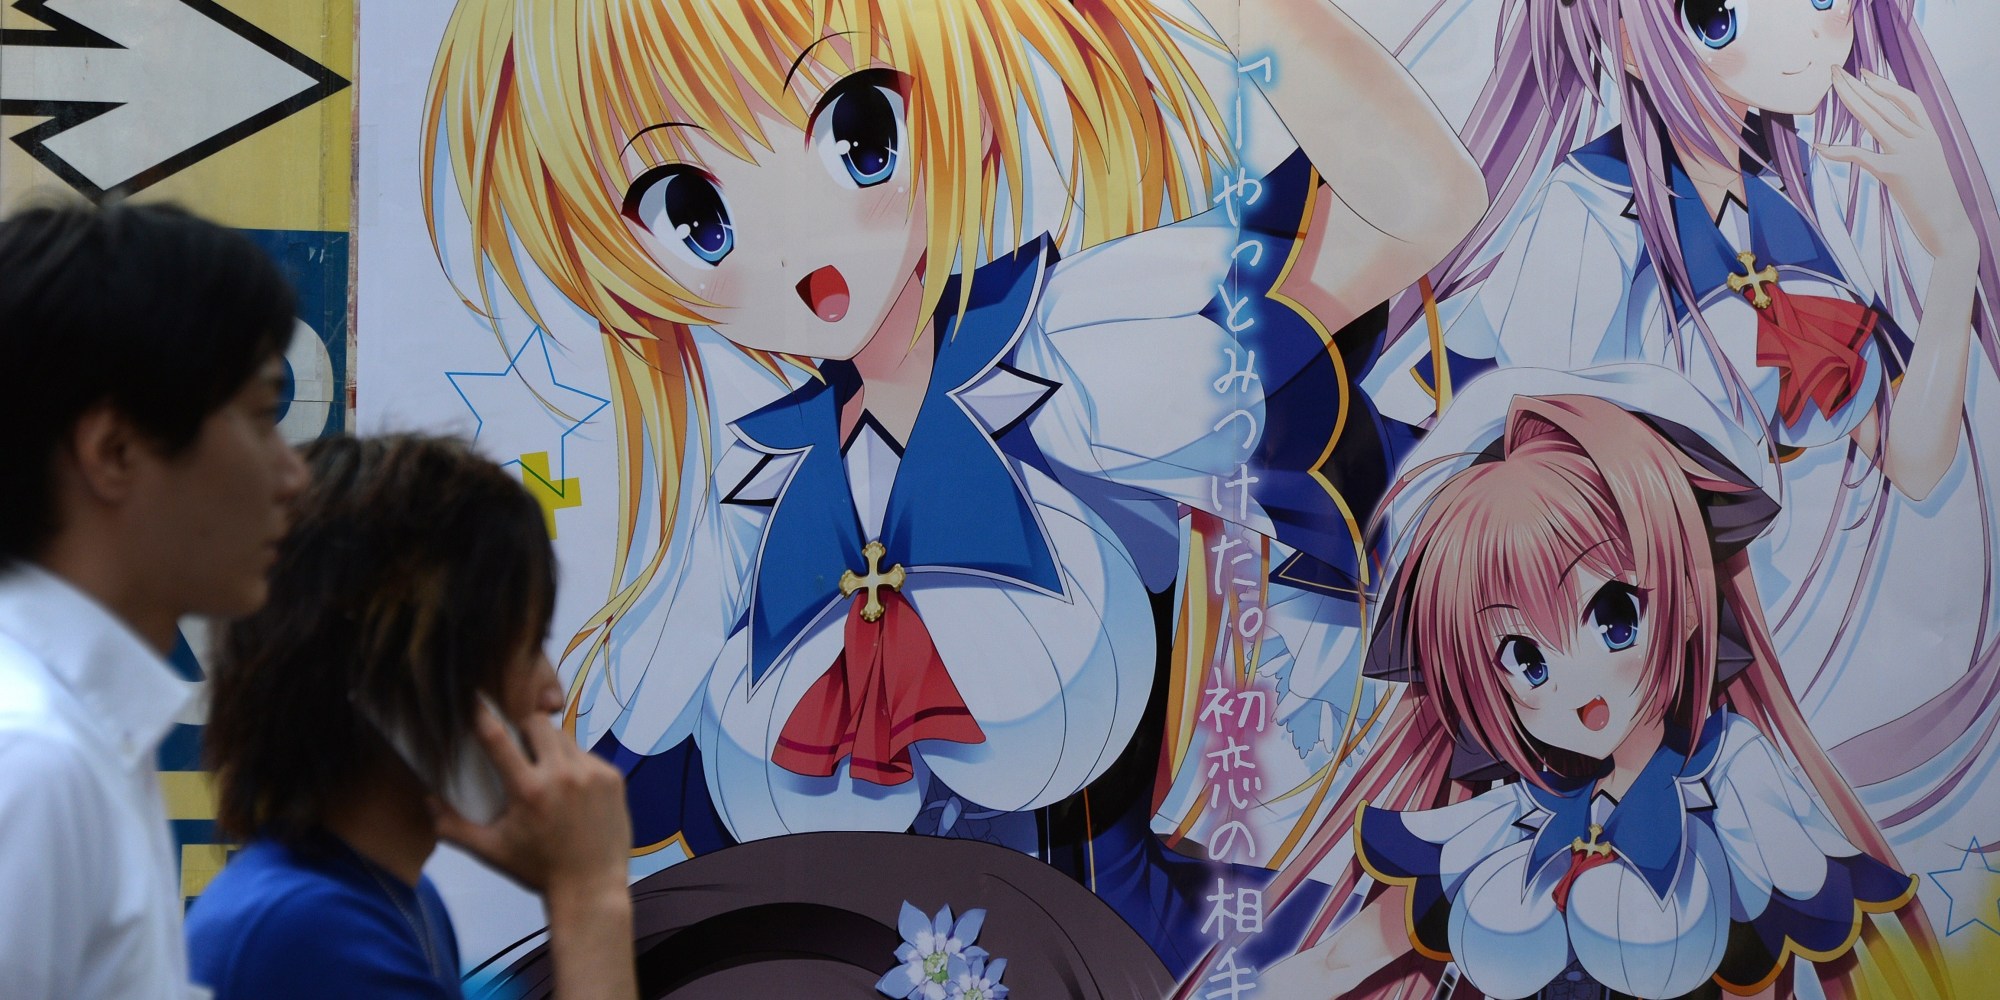 Japan Bans Child Porn, But Makes Exceptions For Manga Comics | HuffPost